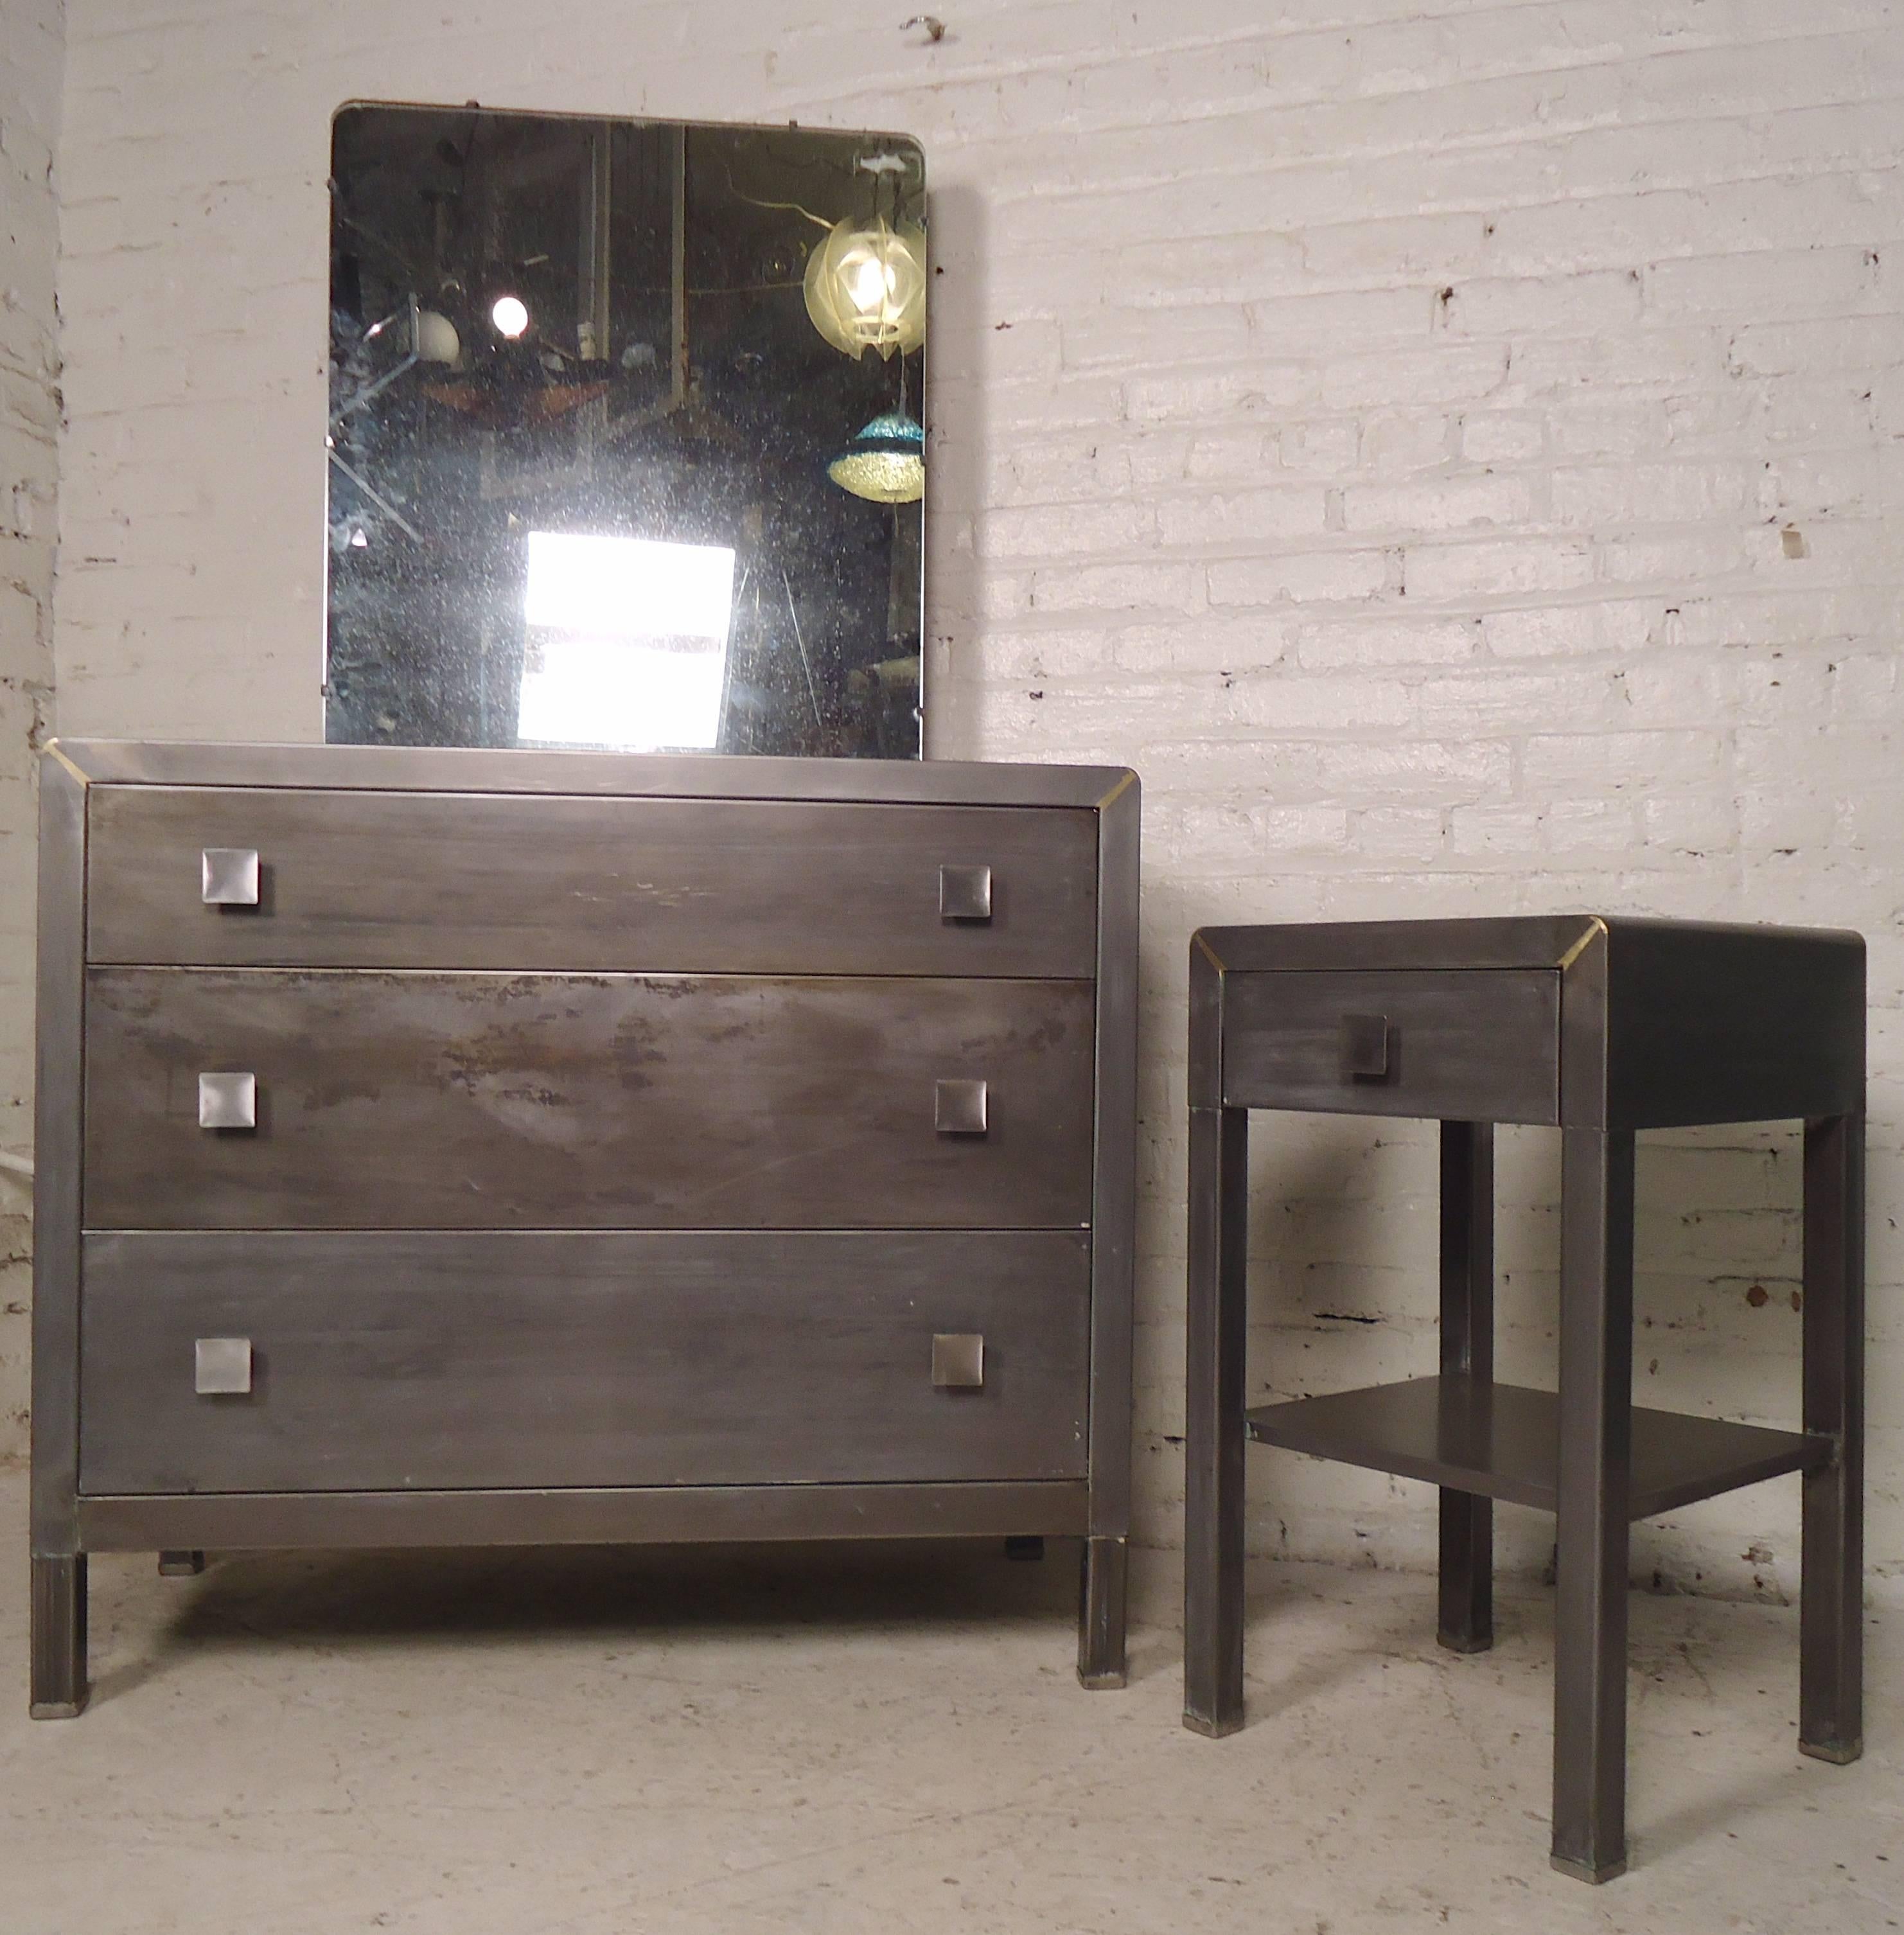 Mid-20th Century Side Table by Simmons with Industrial Style Finish